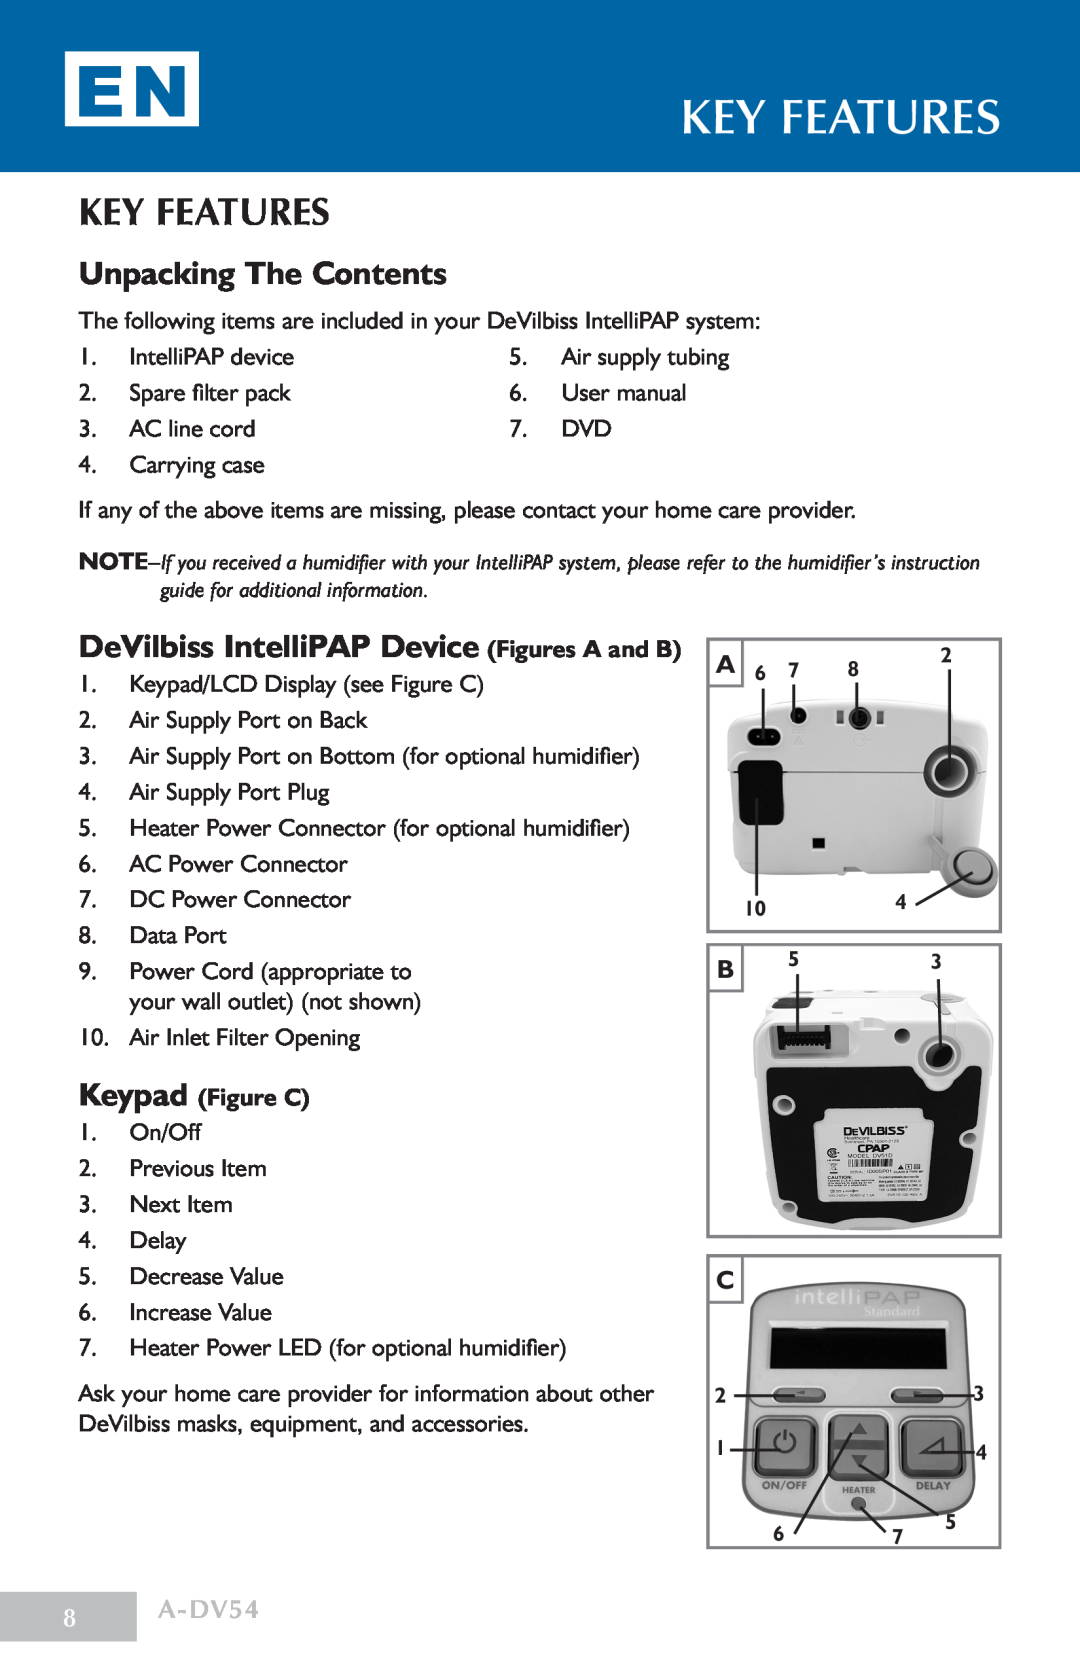 DeVillbiss Air Power Company DV54 manual Key Features, Unpacking The Contents, DeVilbiss IntelliPAP Device Figures A and B 